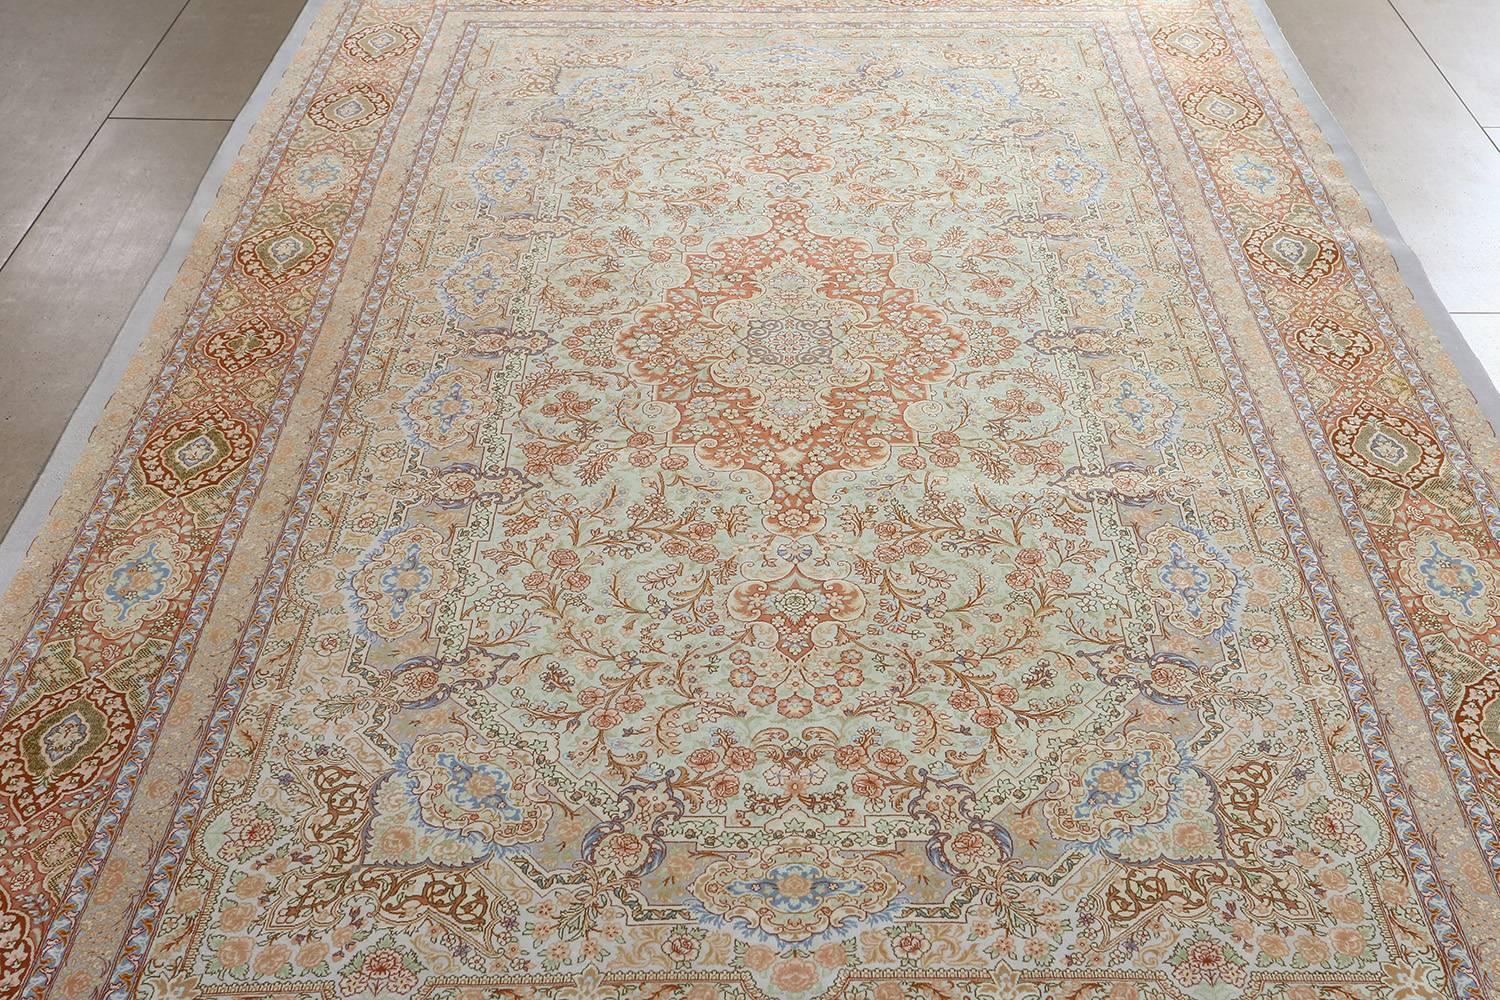 Hand-Knotted Fine Silk Vintage Qum Persian Rug.Size: 6 ft 6 in x 9 ft 11 in (1.98 m x 3.02 m)